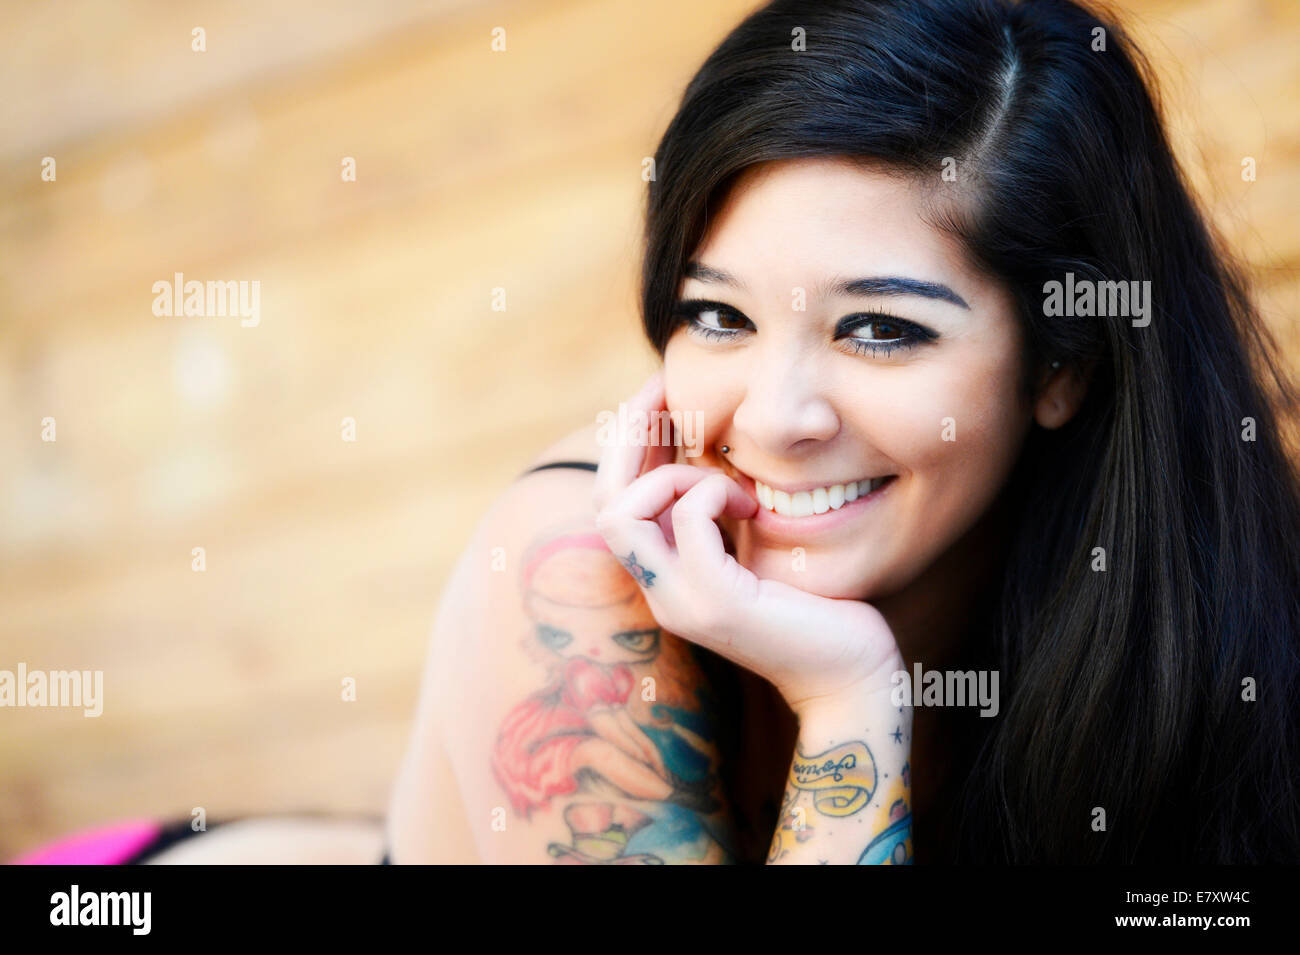 Young smiling woman with tattoos Stock Photo